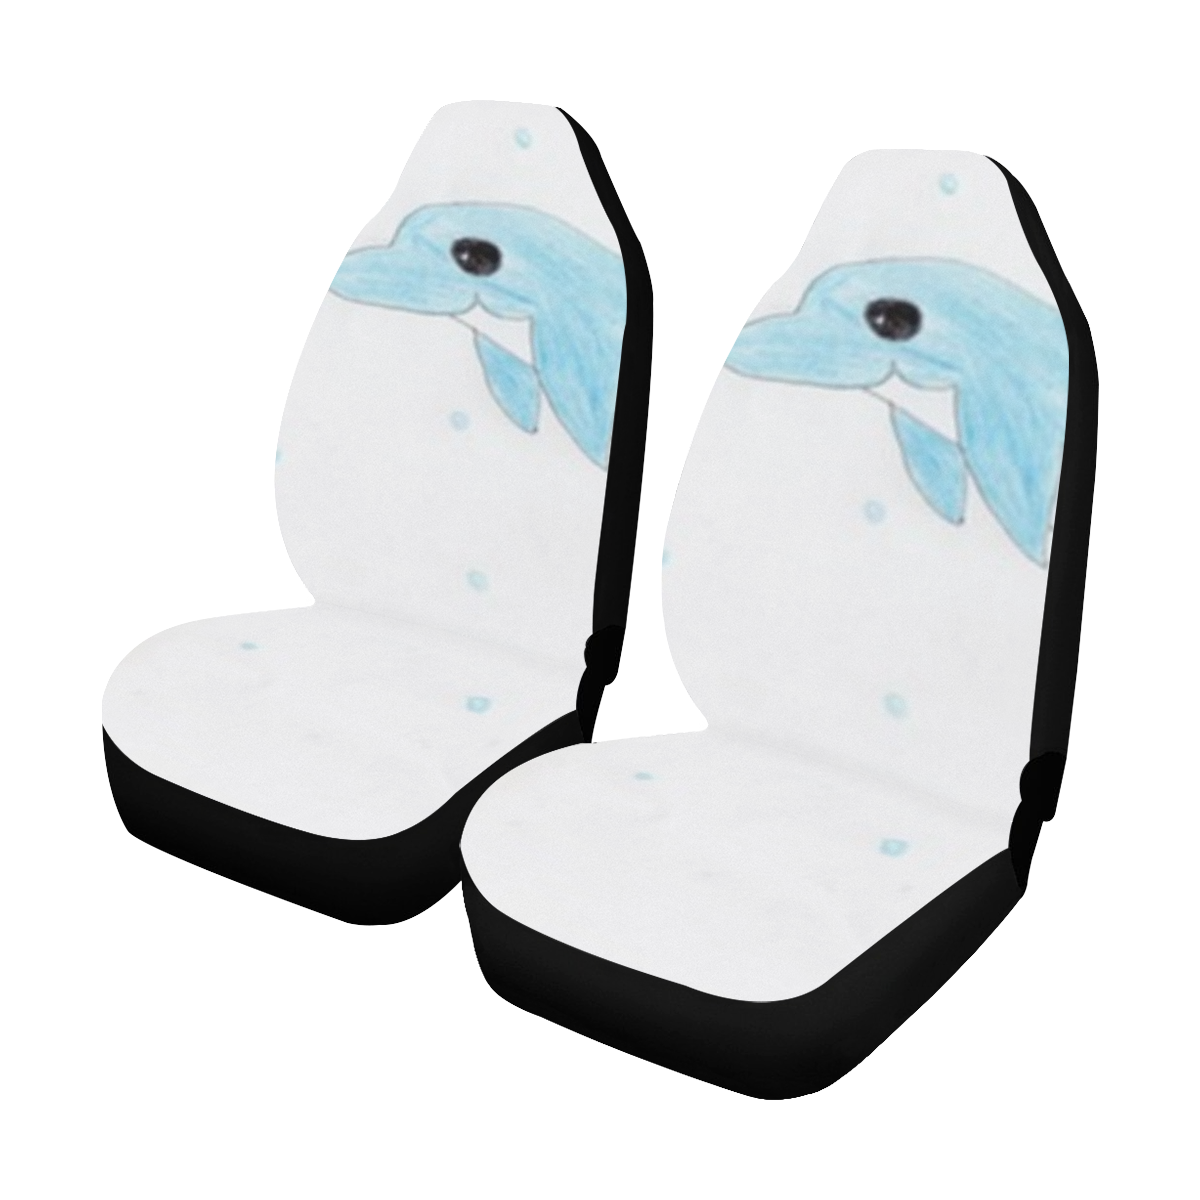 Under_The_Sea__D Car Seat Covers (Set of 2)